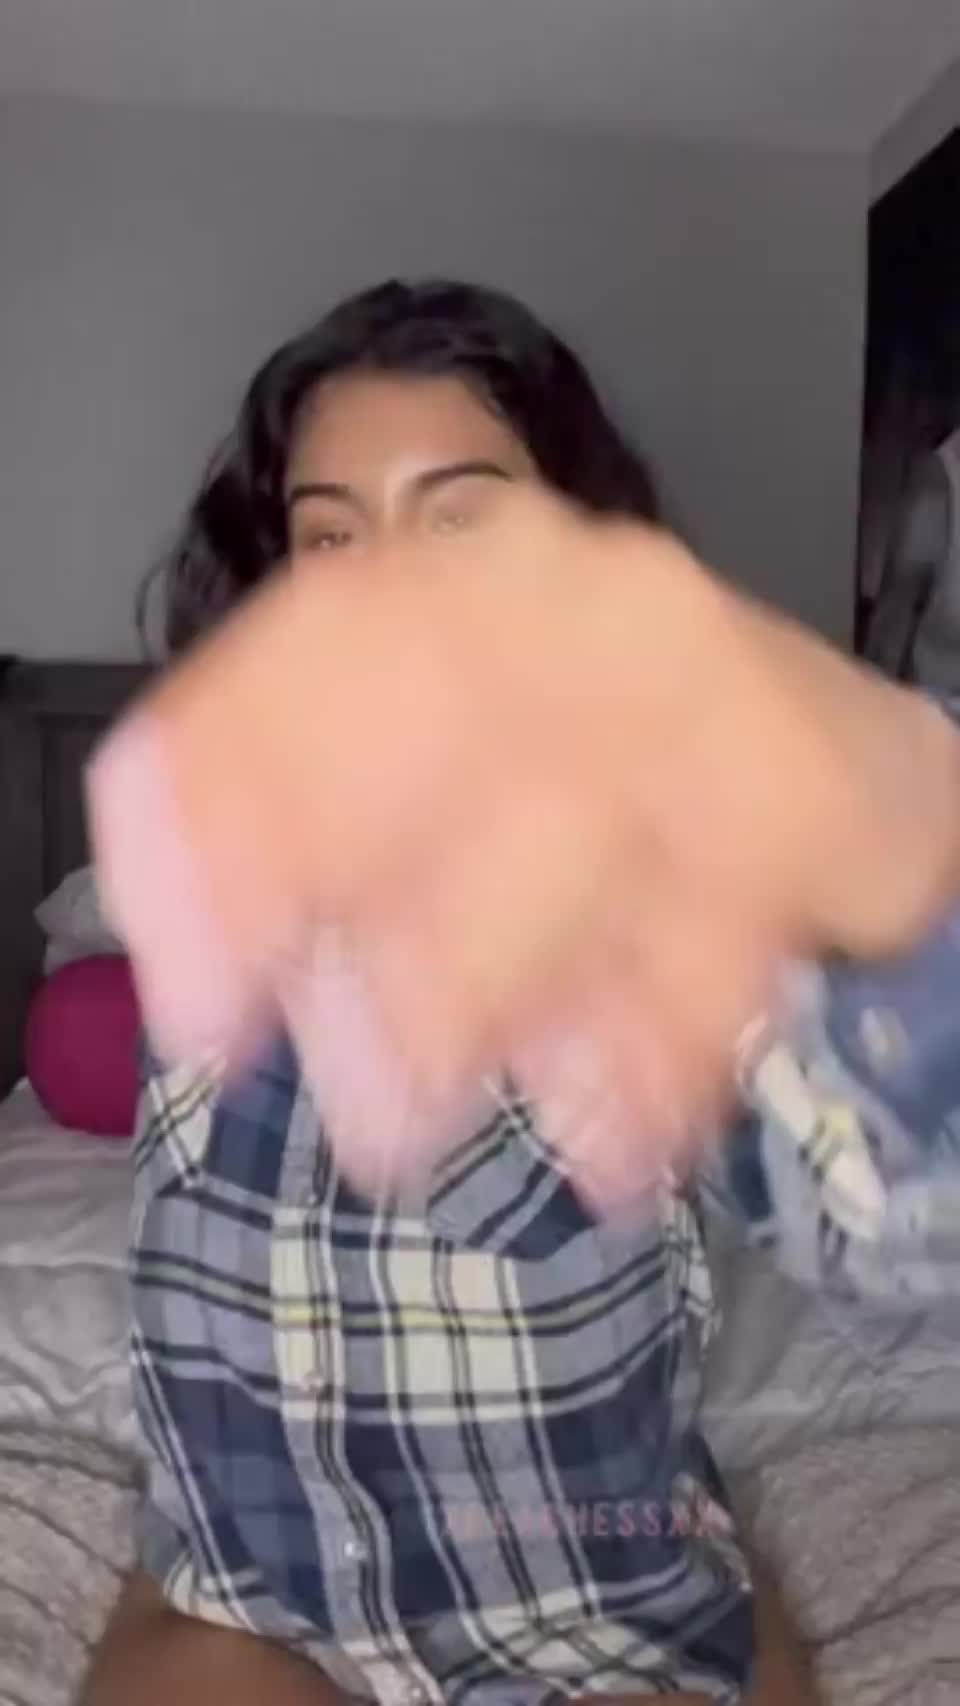 xpeachessxx sweet Mexican pussy